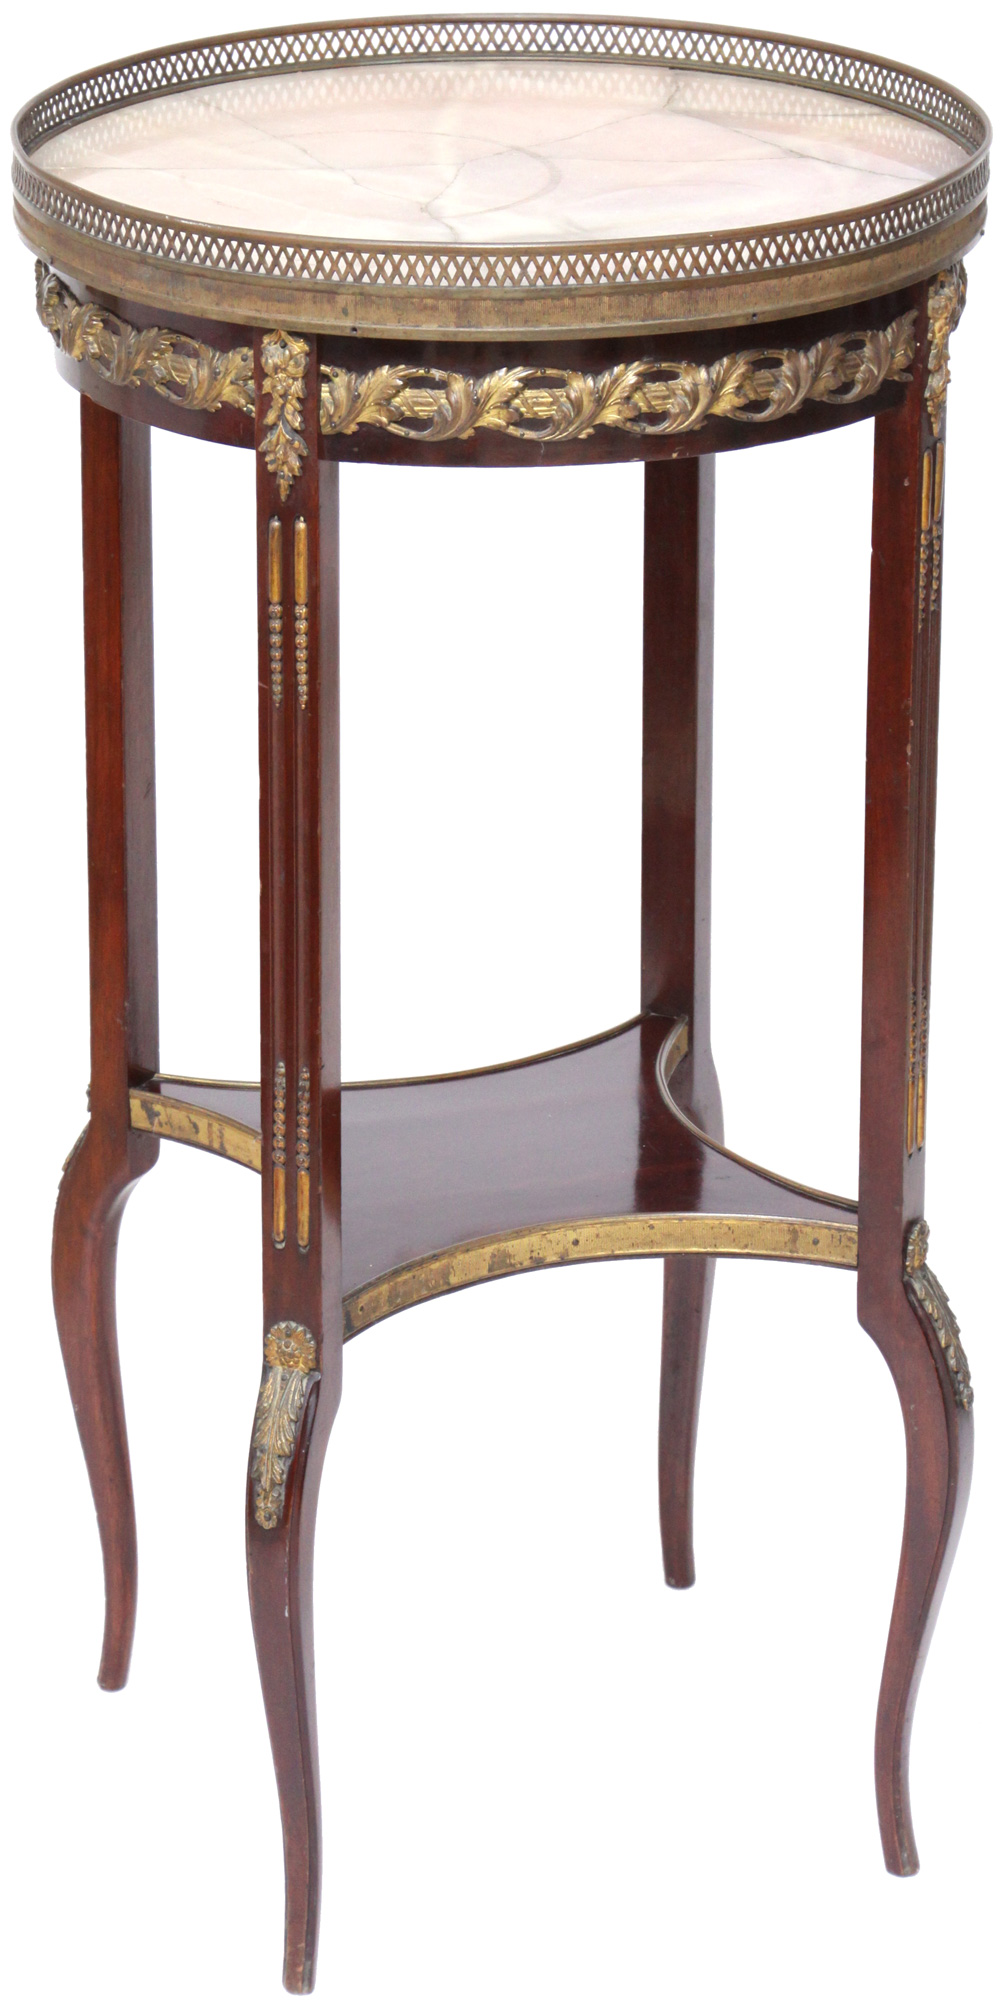 Antique French Plant Stand with classic mahogany frame and Rounded Marble Top - מעמד לעציץ צרפתי עתיק - Back To List of Antique Furniture